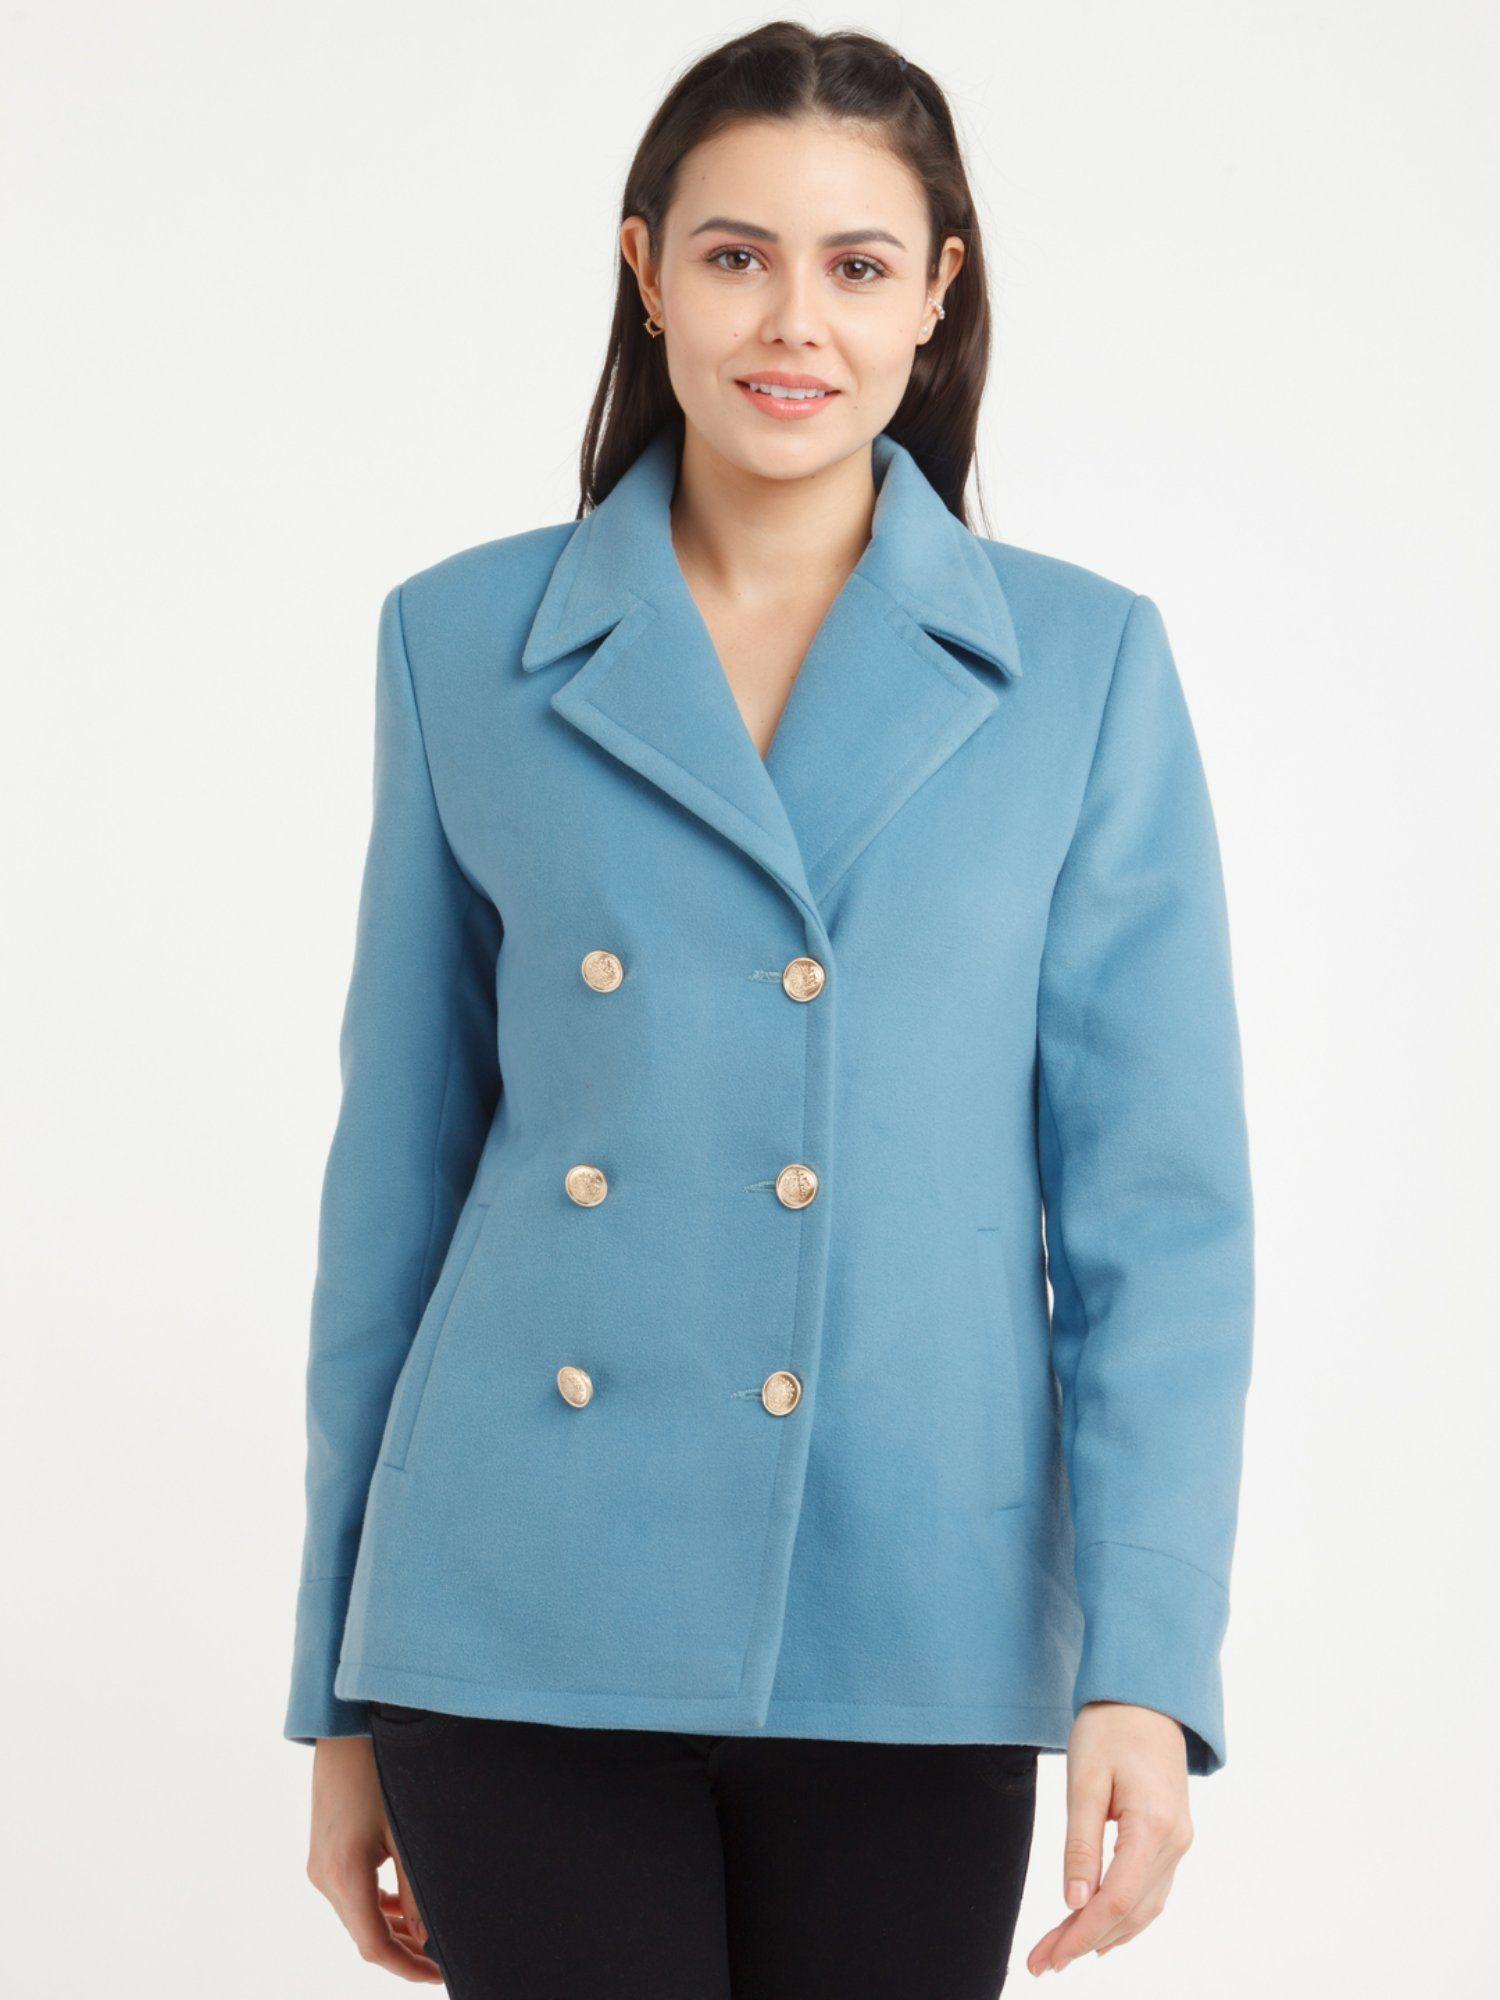 womens blue solid jacket